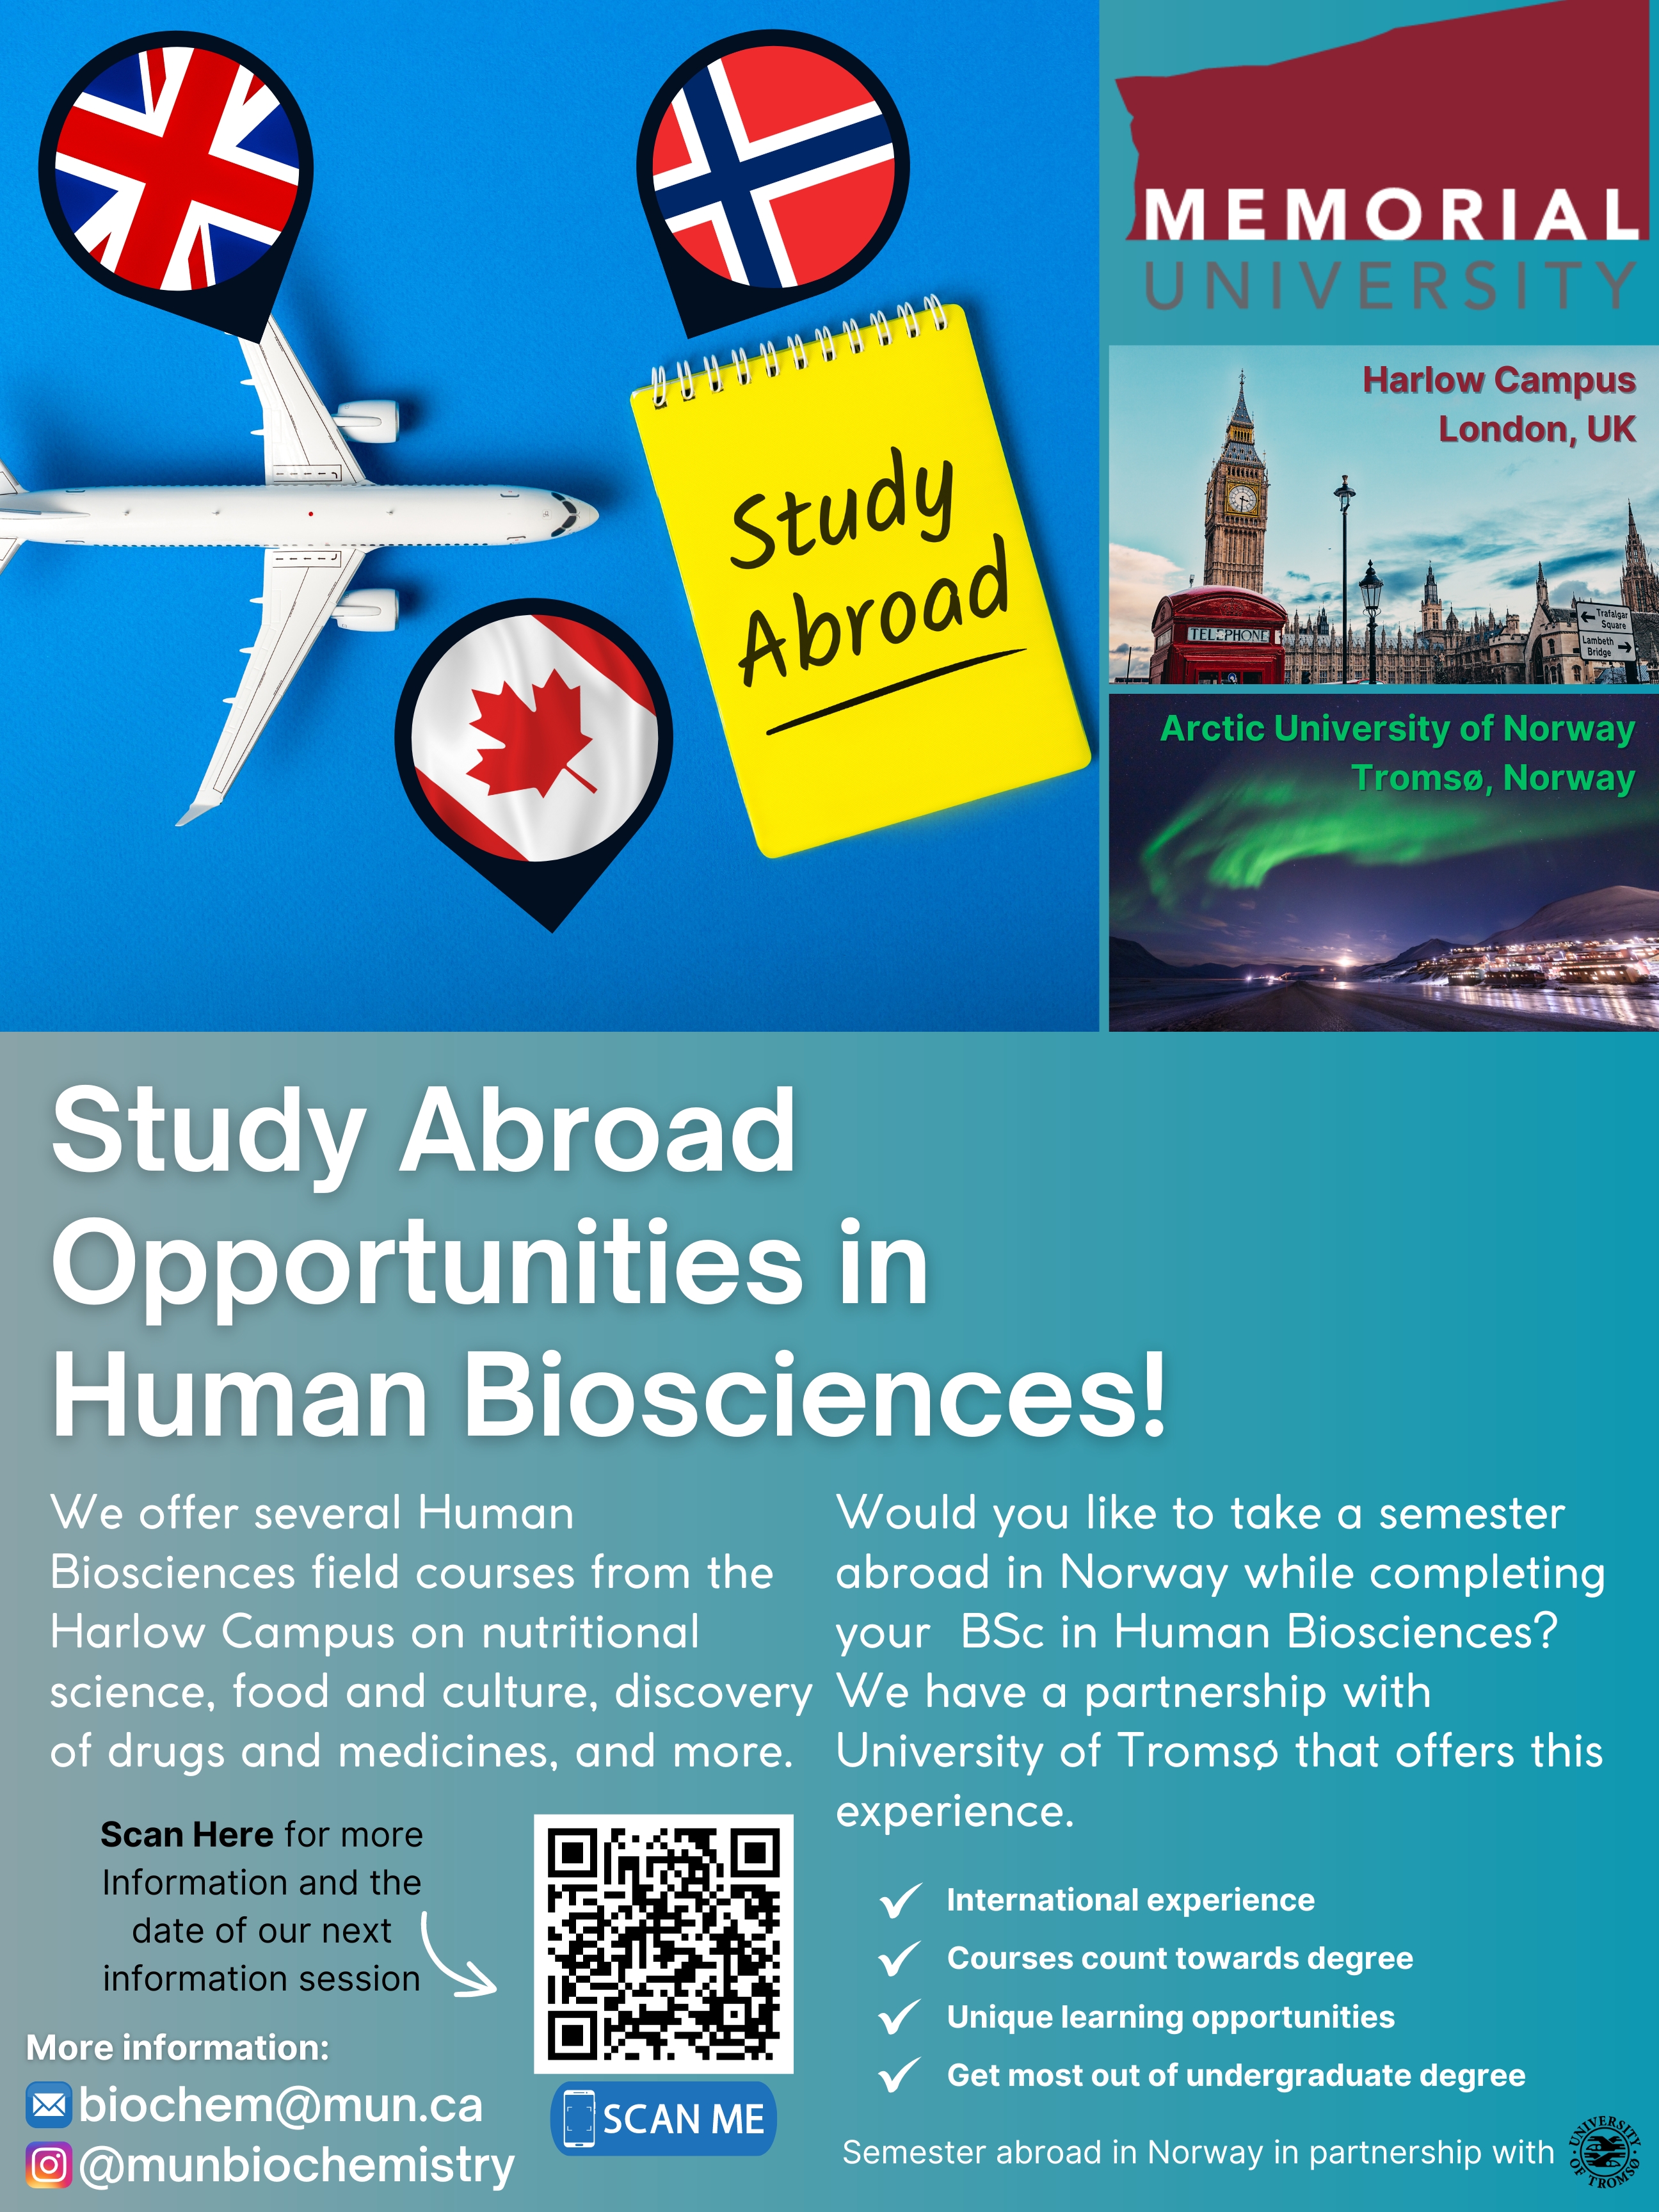 Current study abroad options in the Human Biosciences program